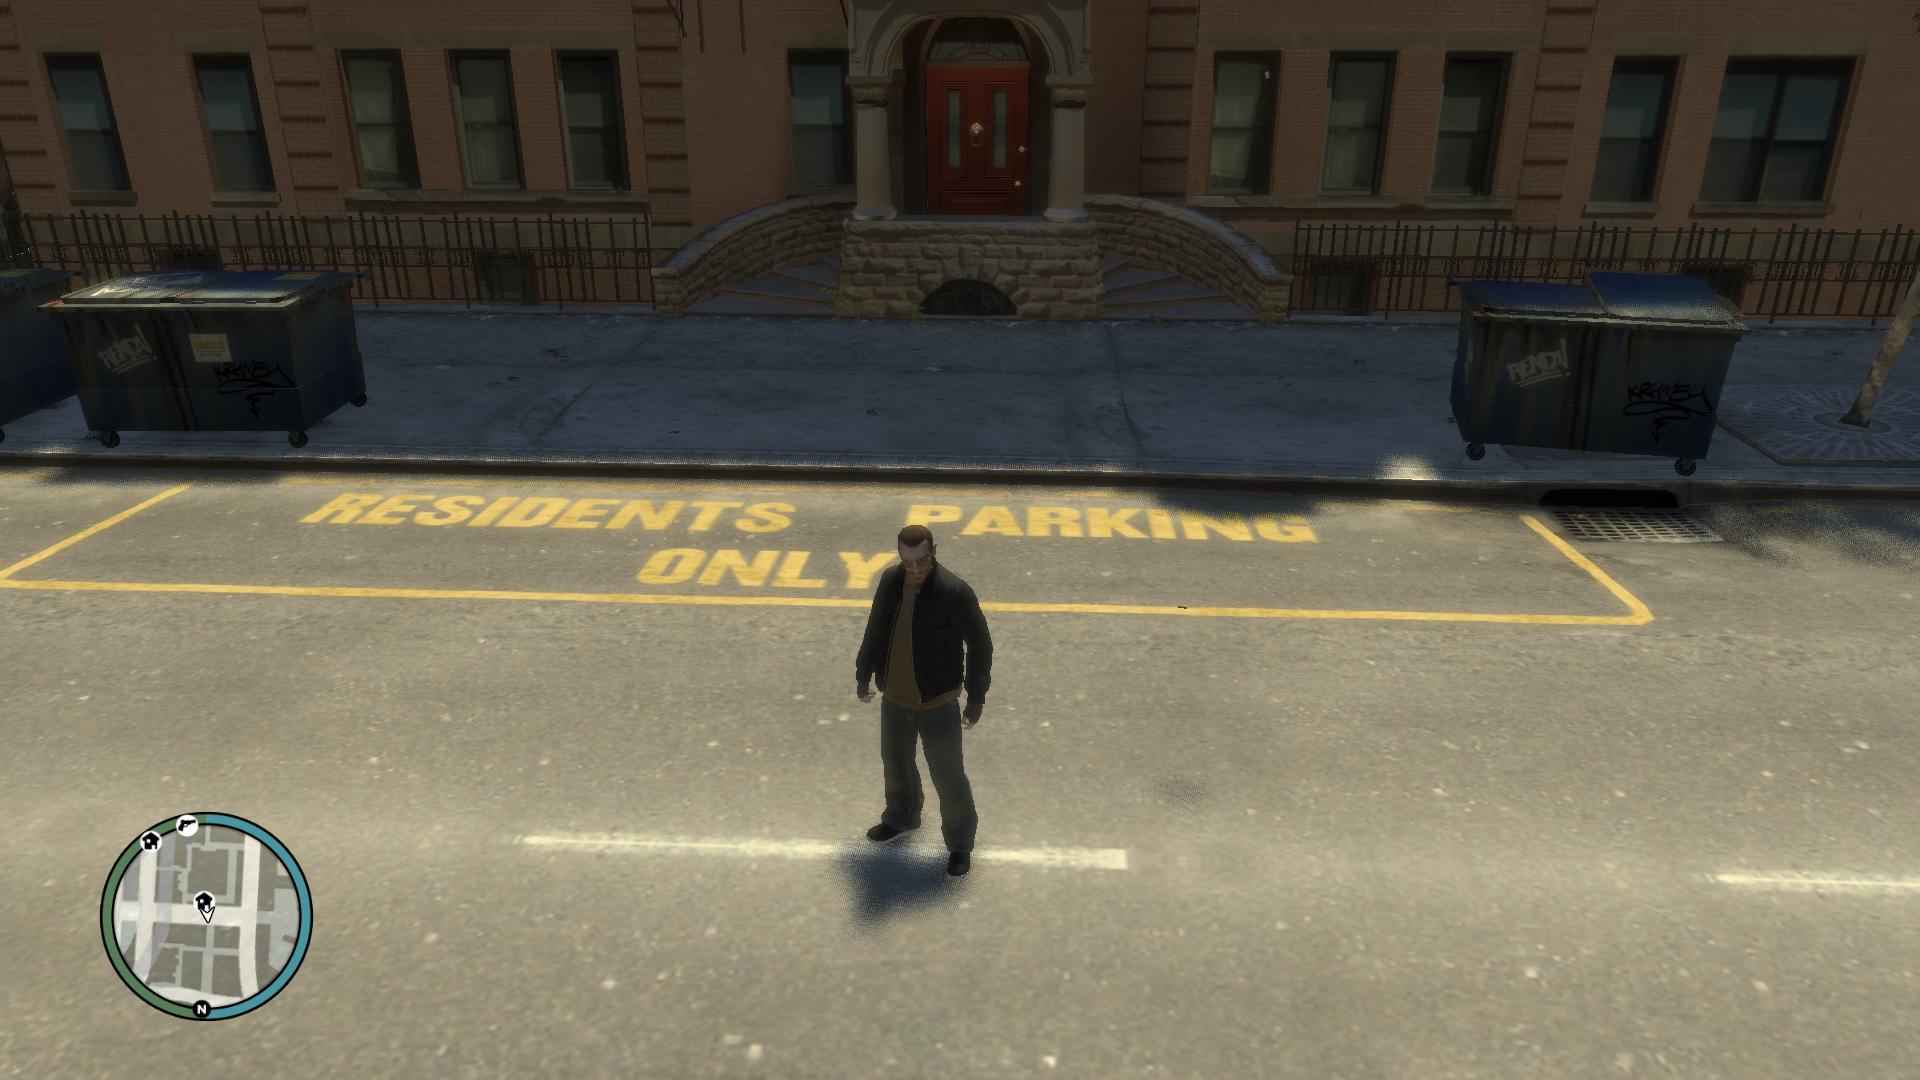 Download GTA IV Patch 1.0.7.0 for Windows